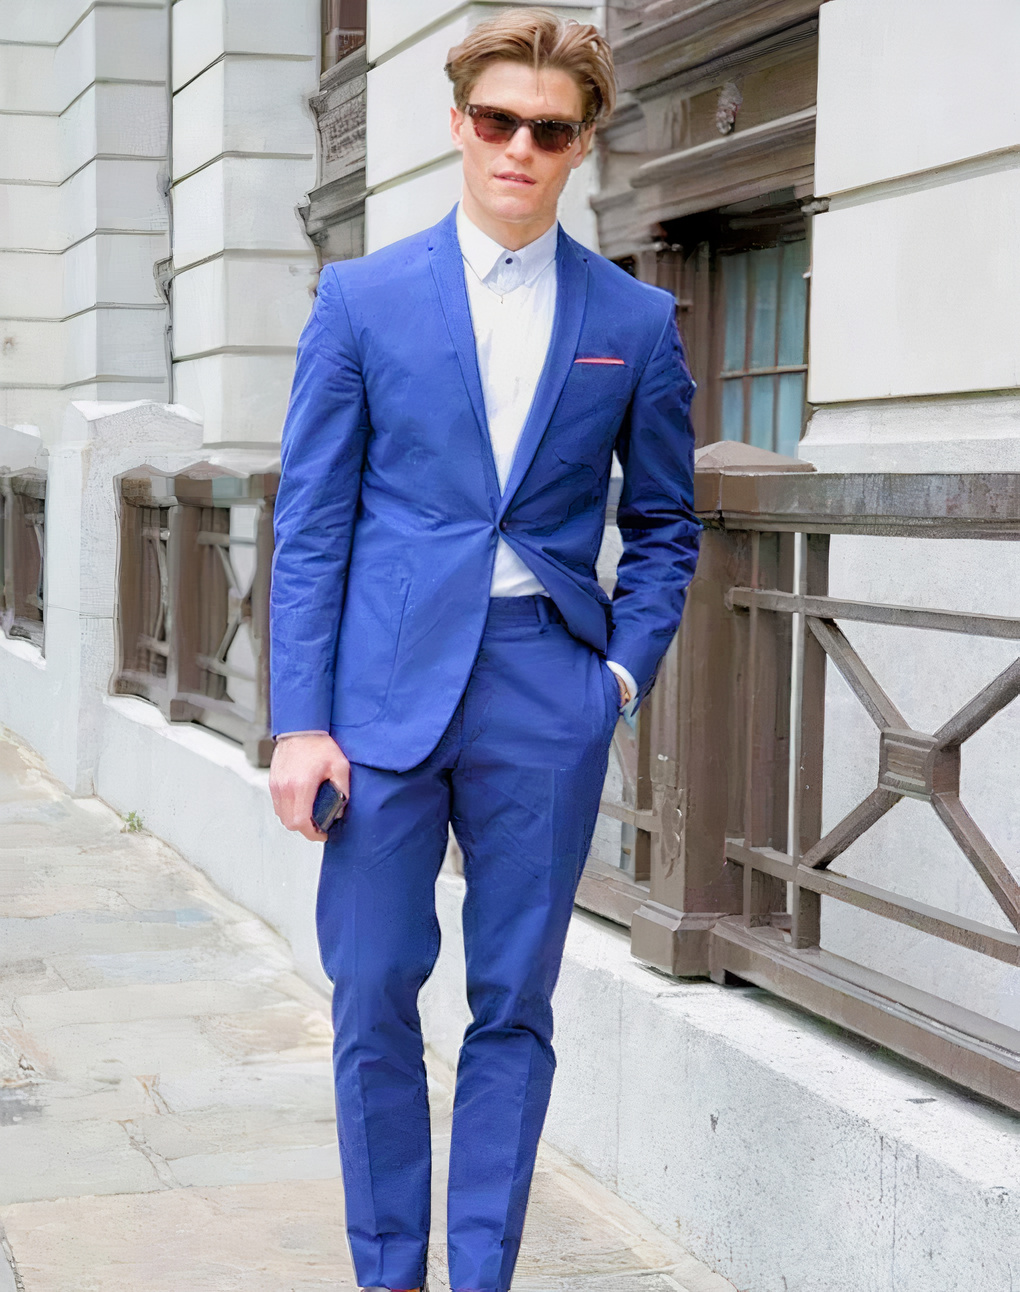 How to Wear a Blue Suit: Mastering the Look - Suits Expert